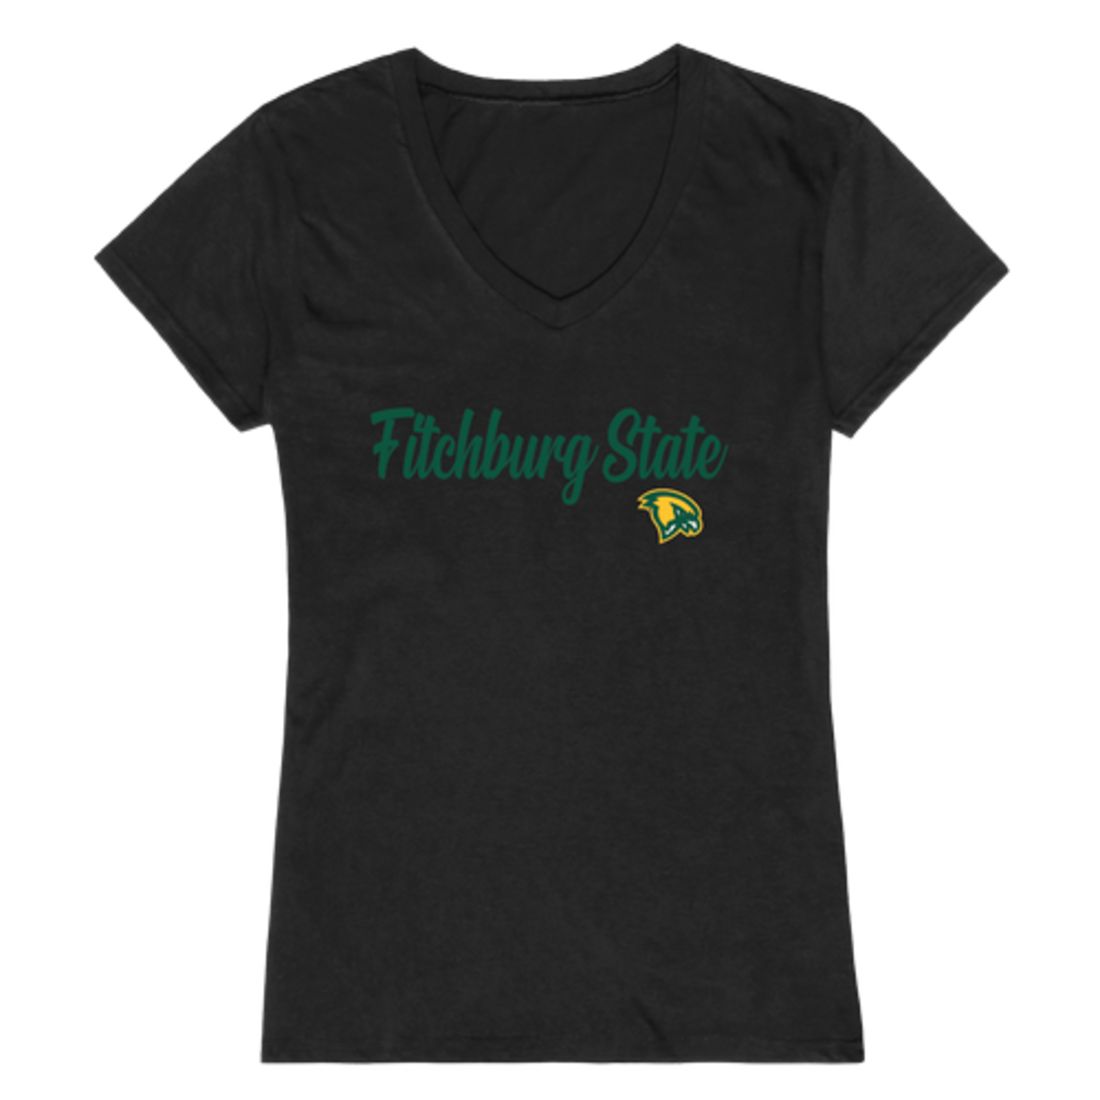 Fitchburg State University Falcons Womens Athletic T-Shirt Tee